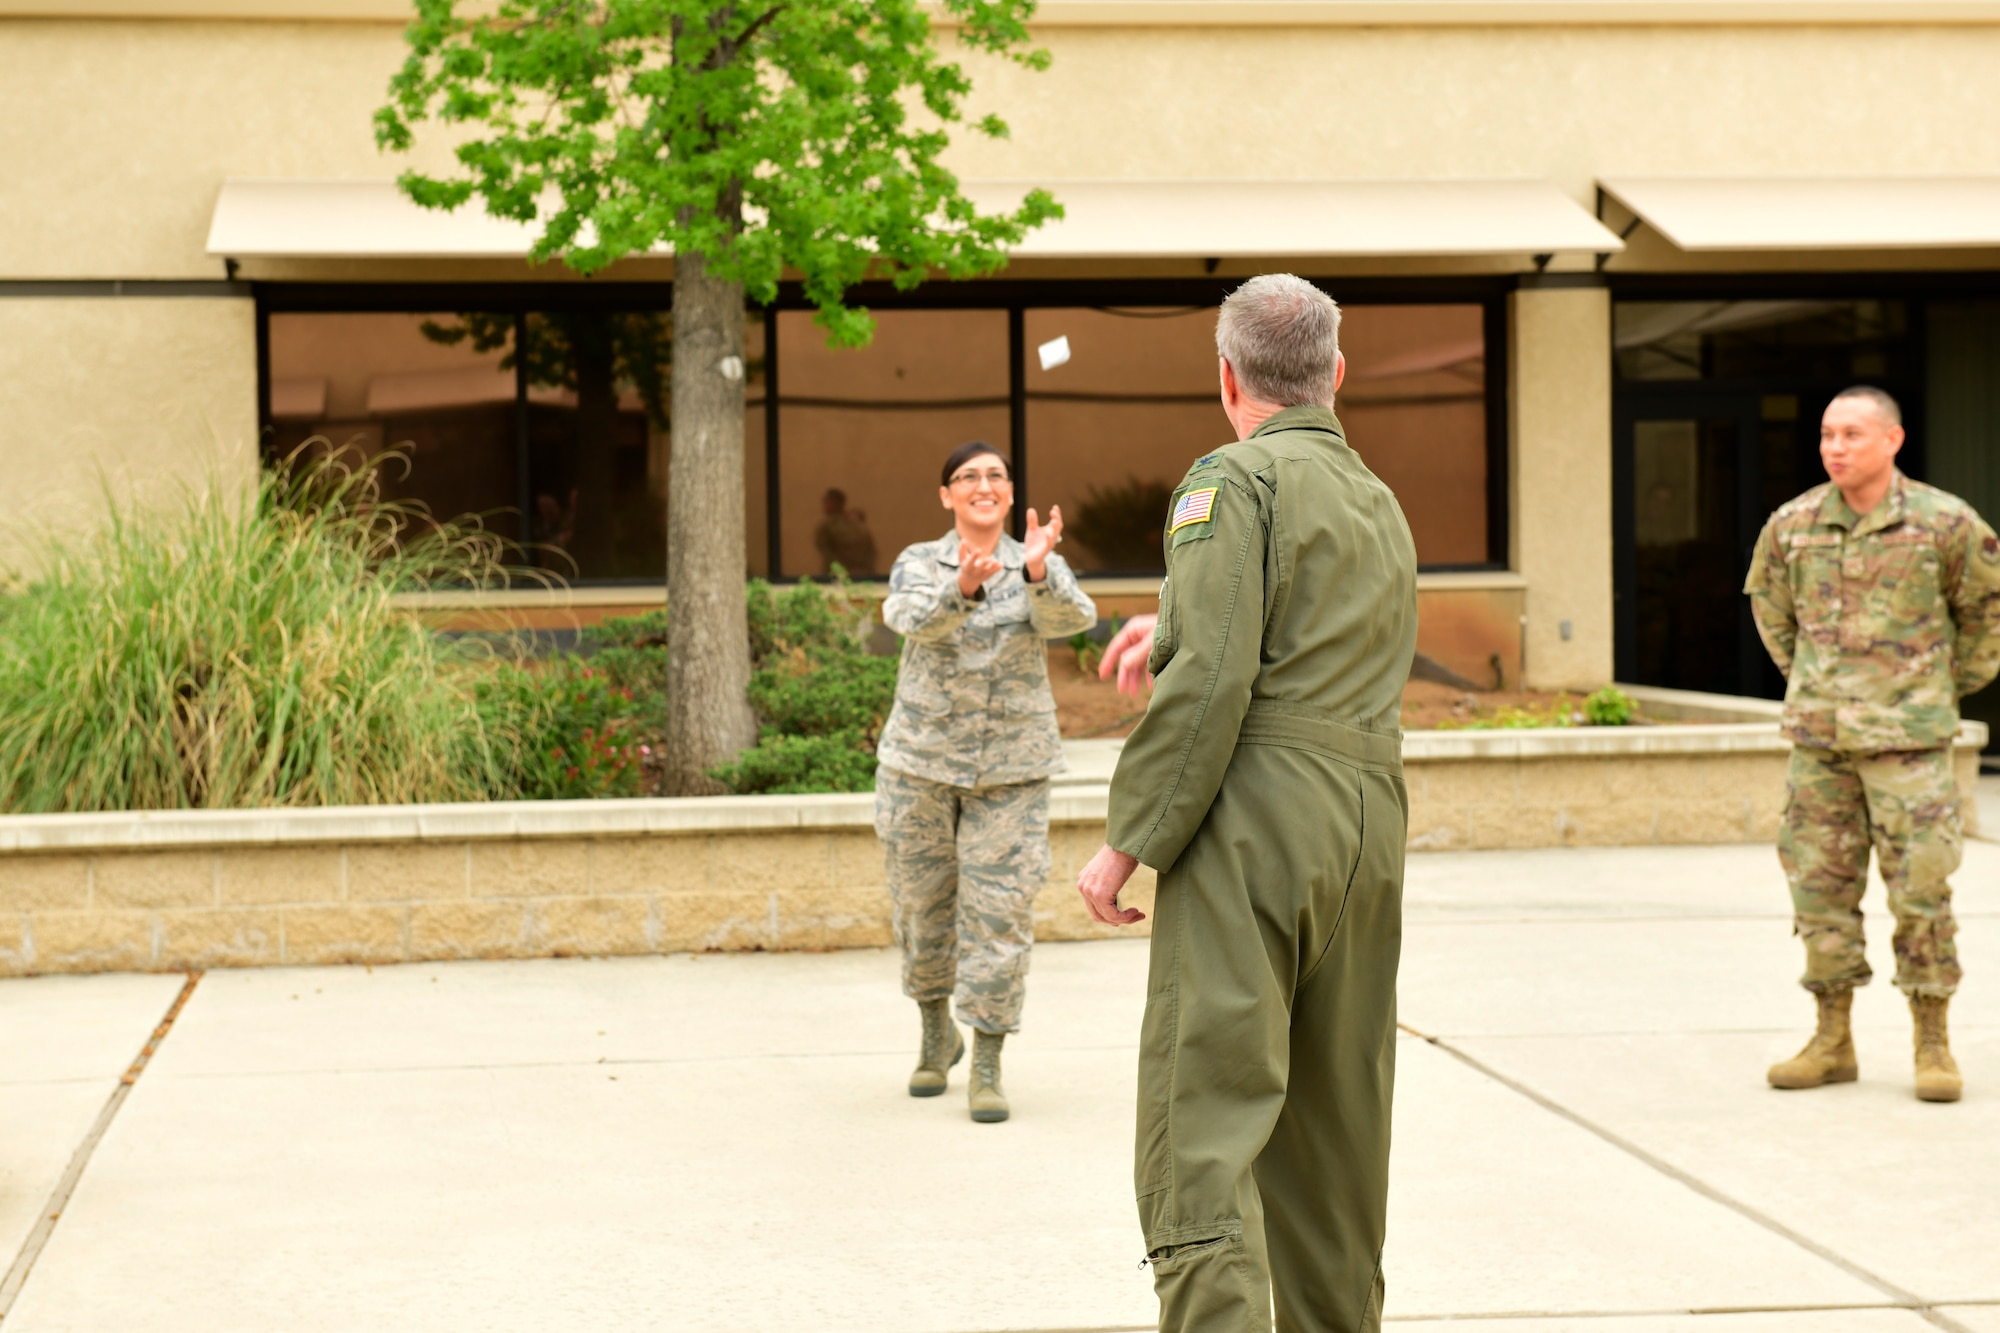 Senior Master Sgt. catches a commander's coin during a ceremony